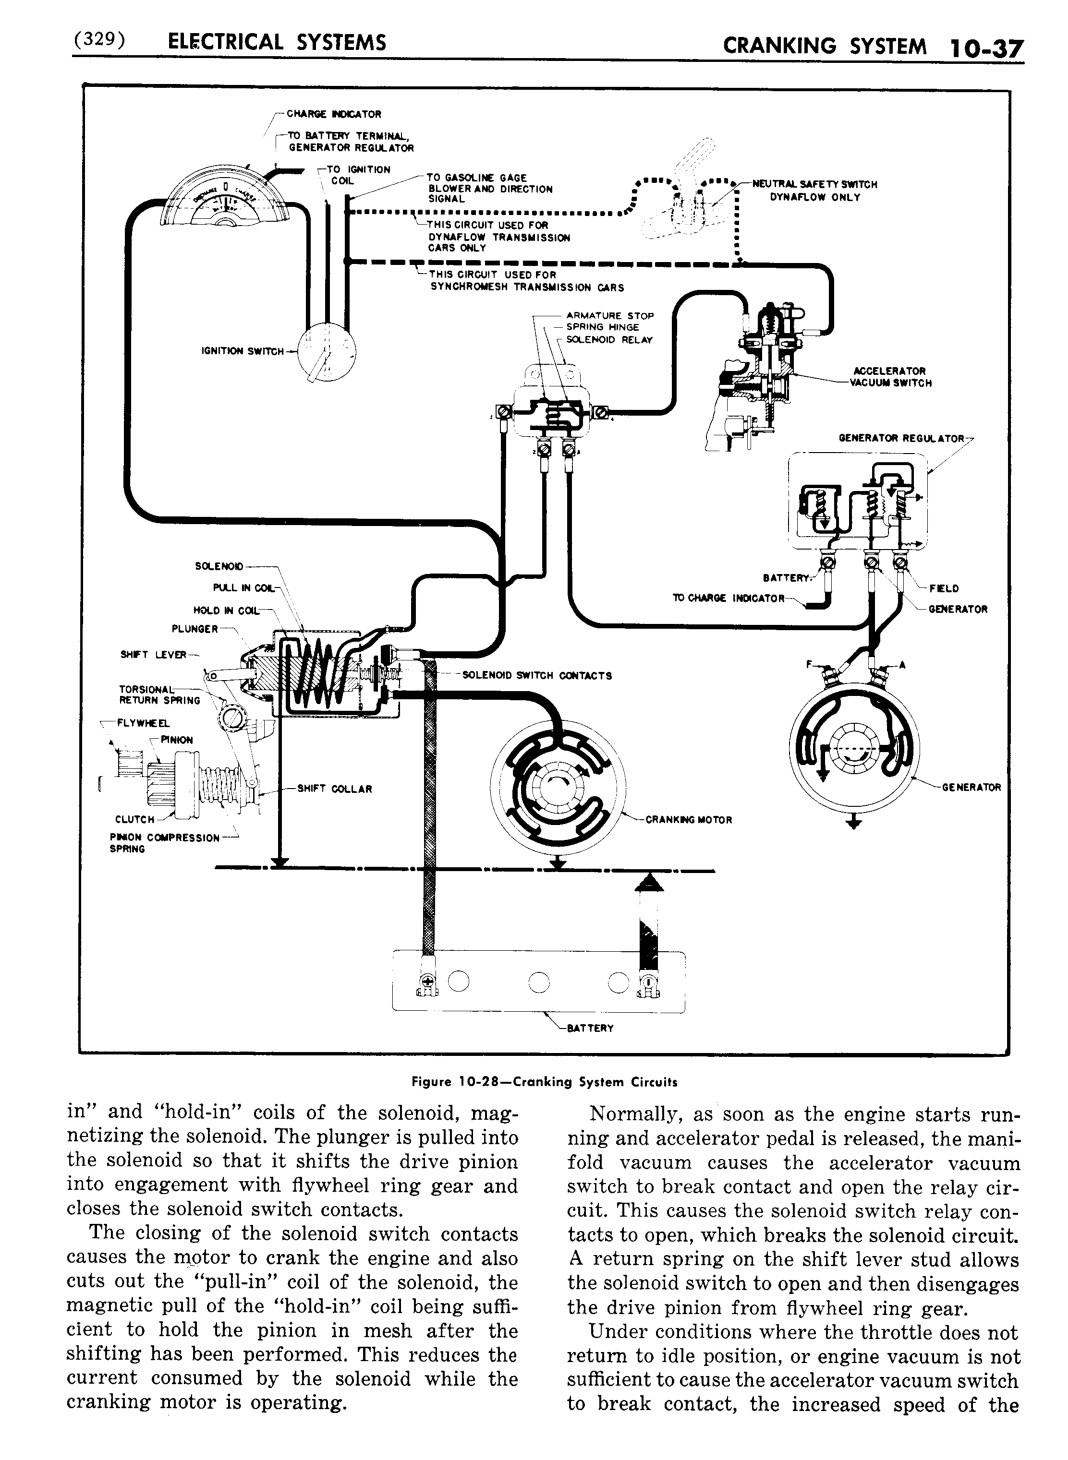 n_11 1951 Buick Shop Manual - Electrical Systems-037-037.jpg